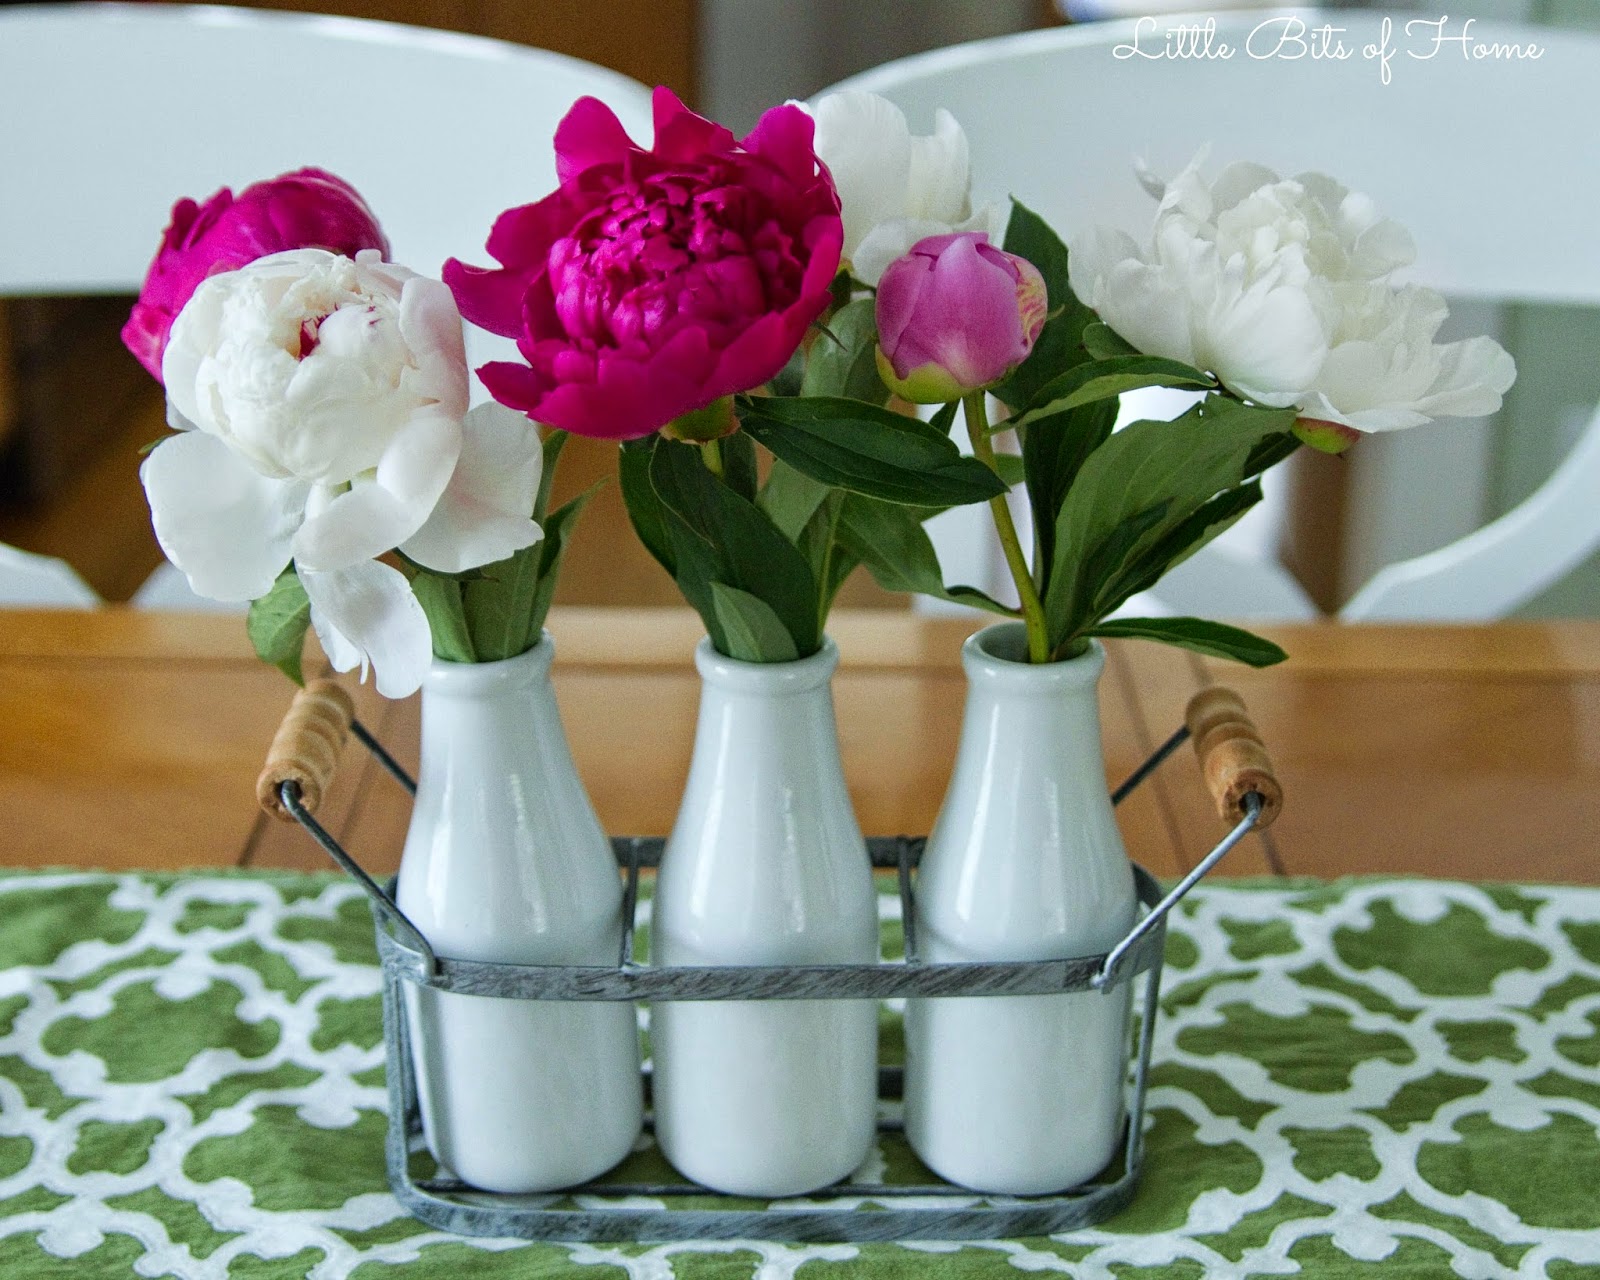 Little Bits of Home: Spring Peony Centerpiece